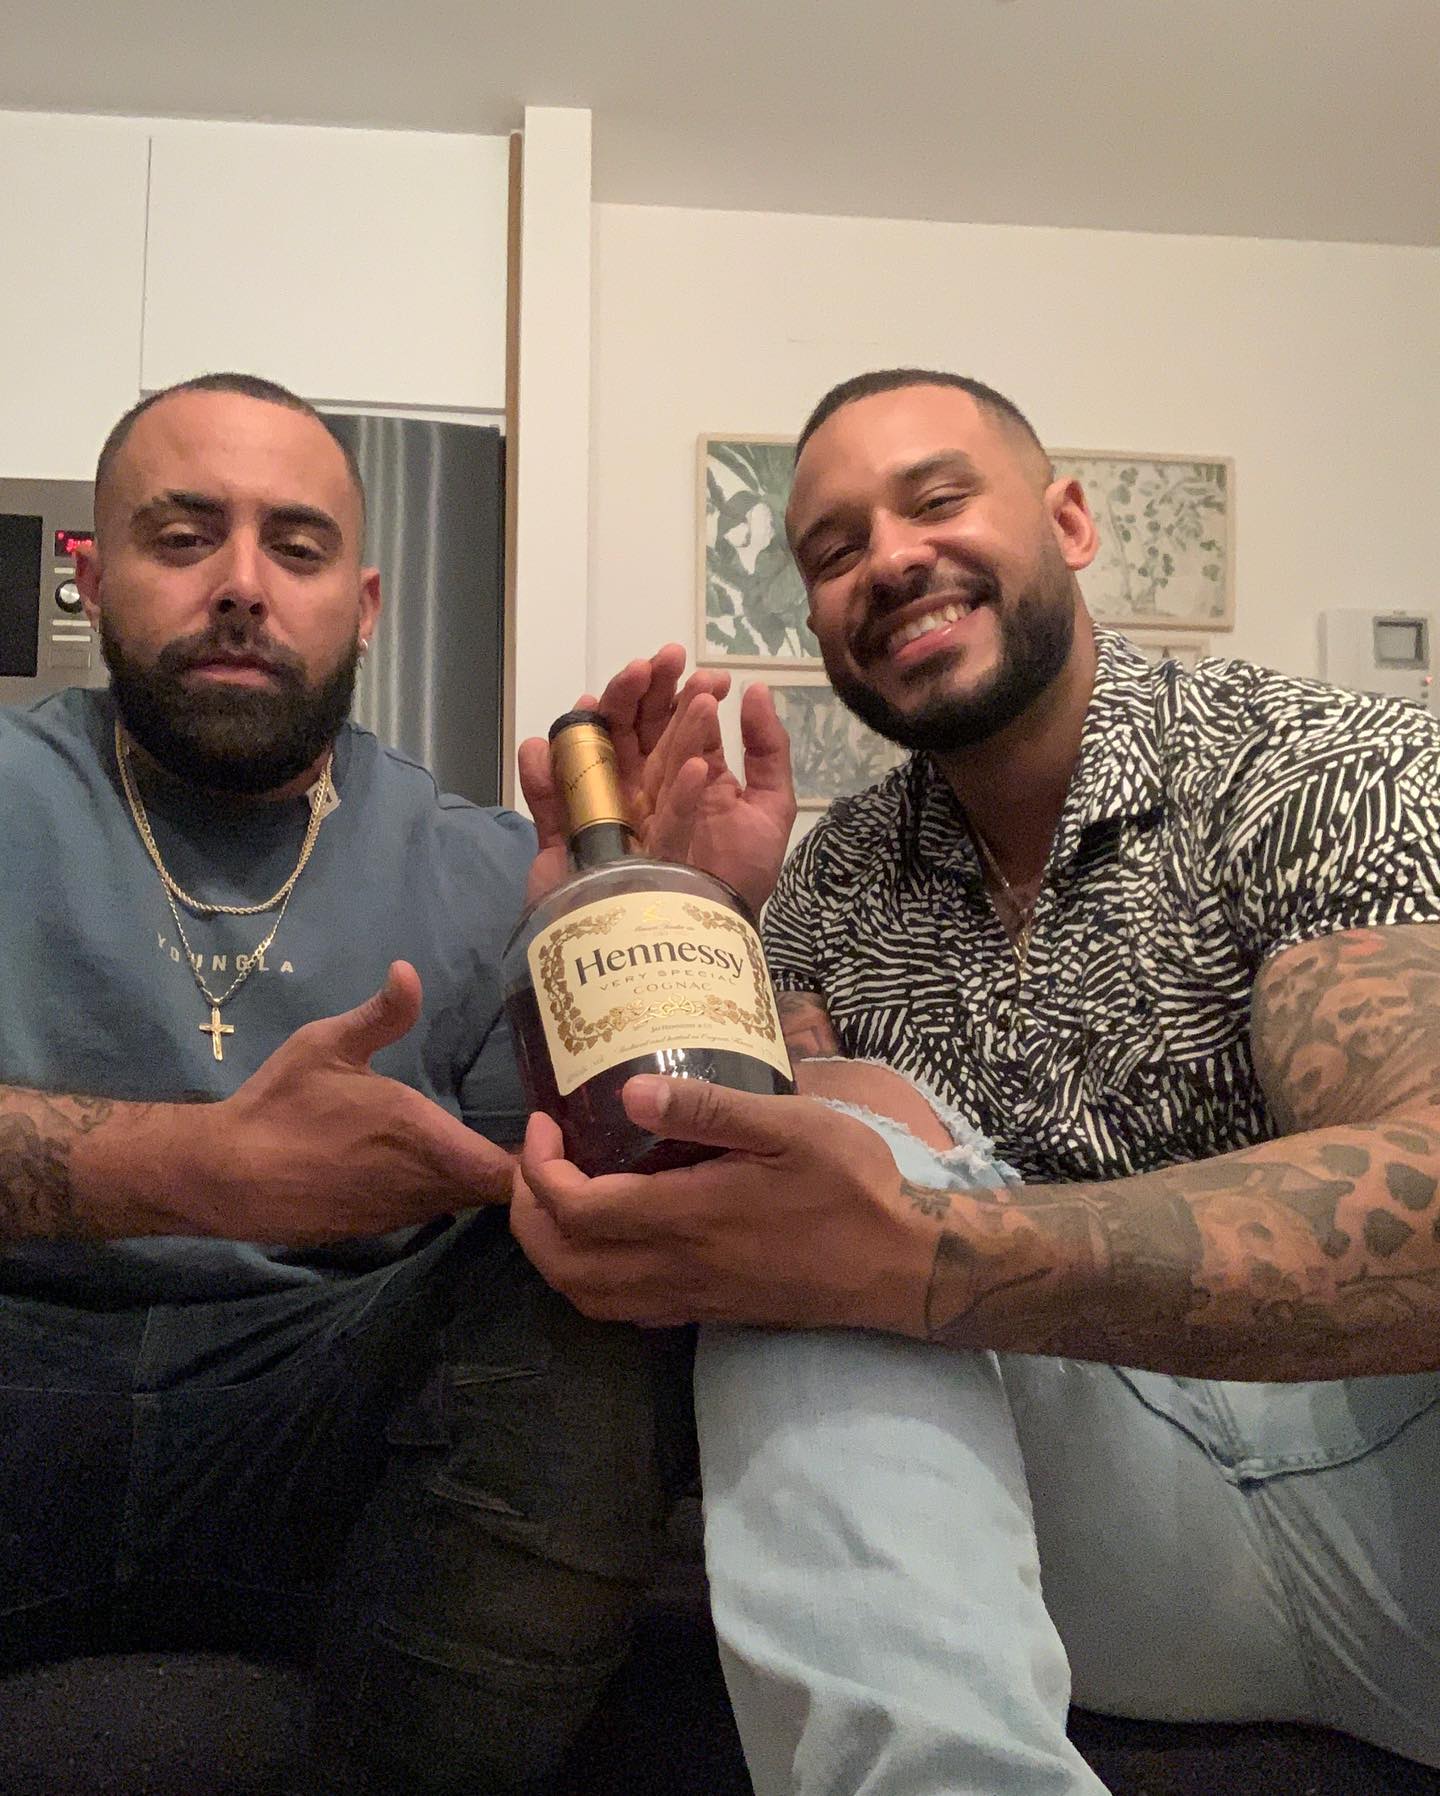 Sleep, Work, Train, REPEAT. 
I did enjoy a little Hennessy for Father’s Day however 🤧